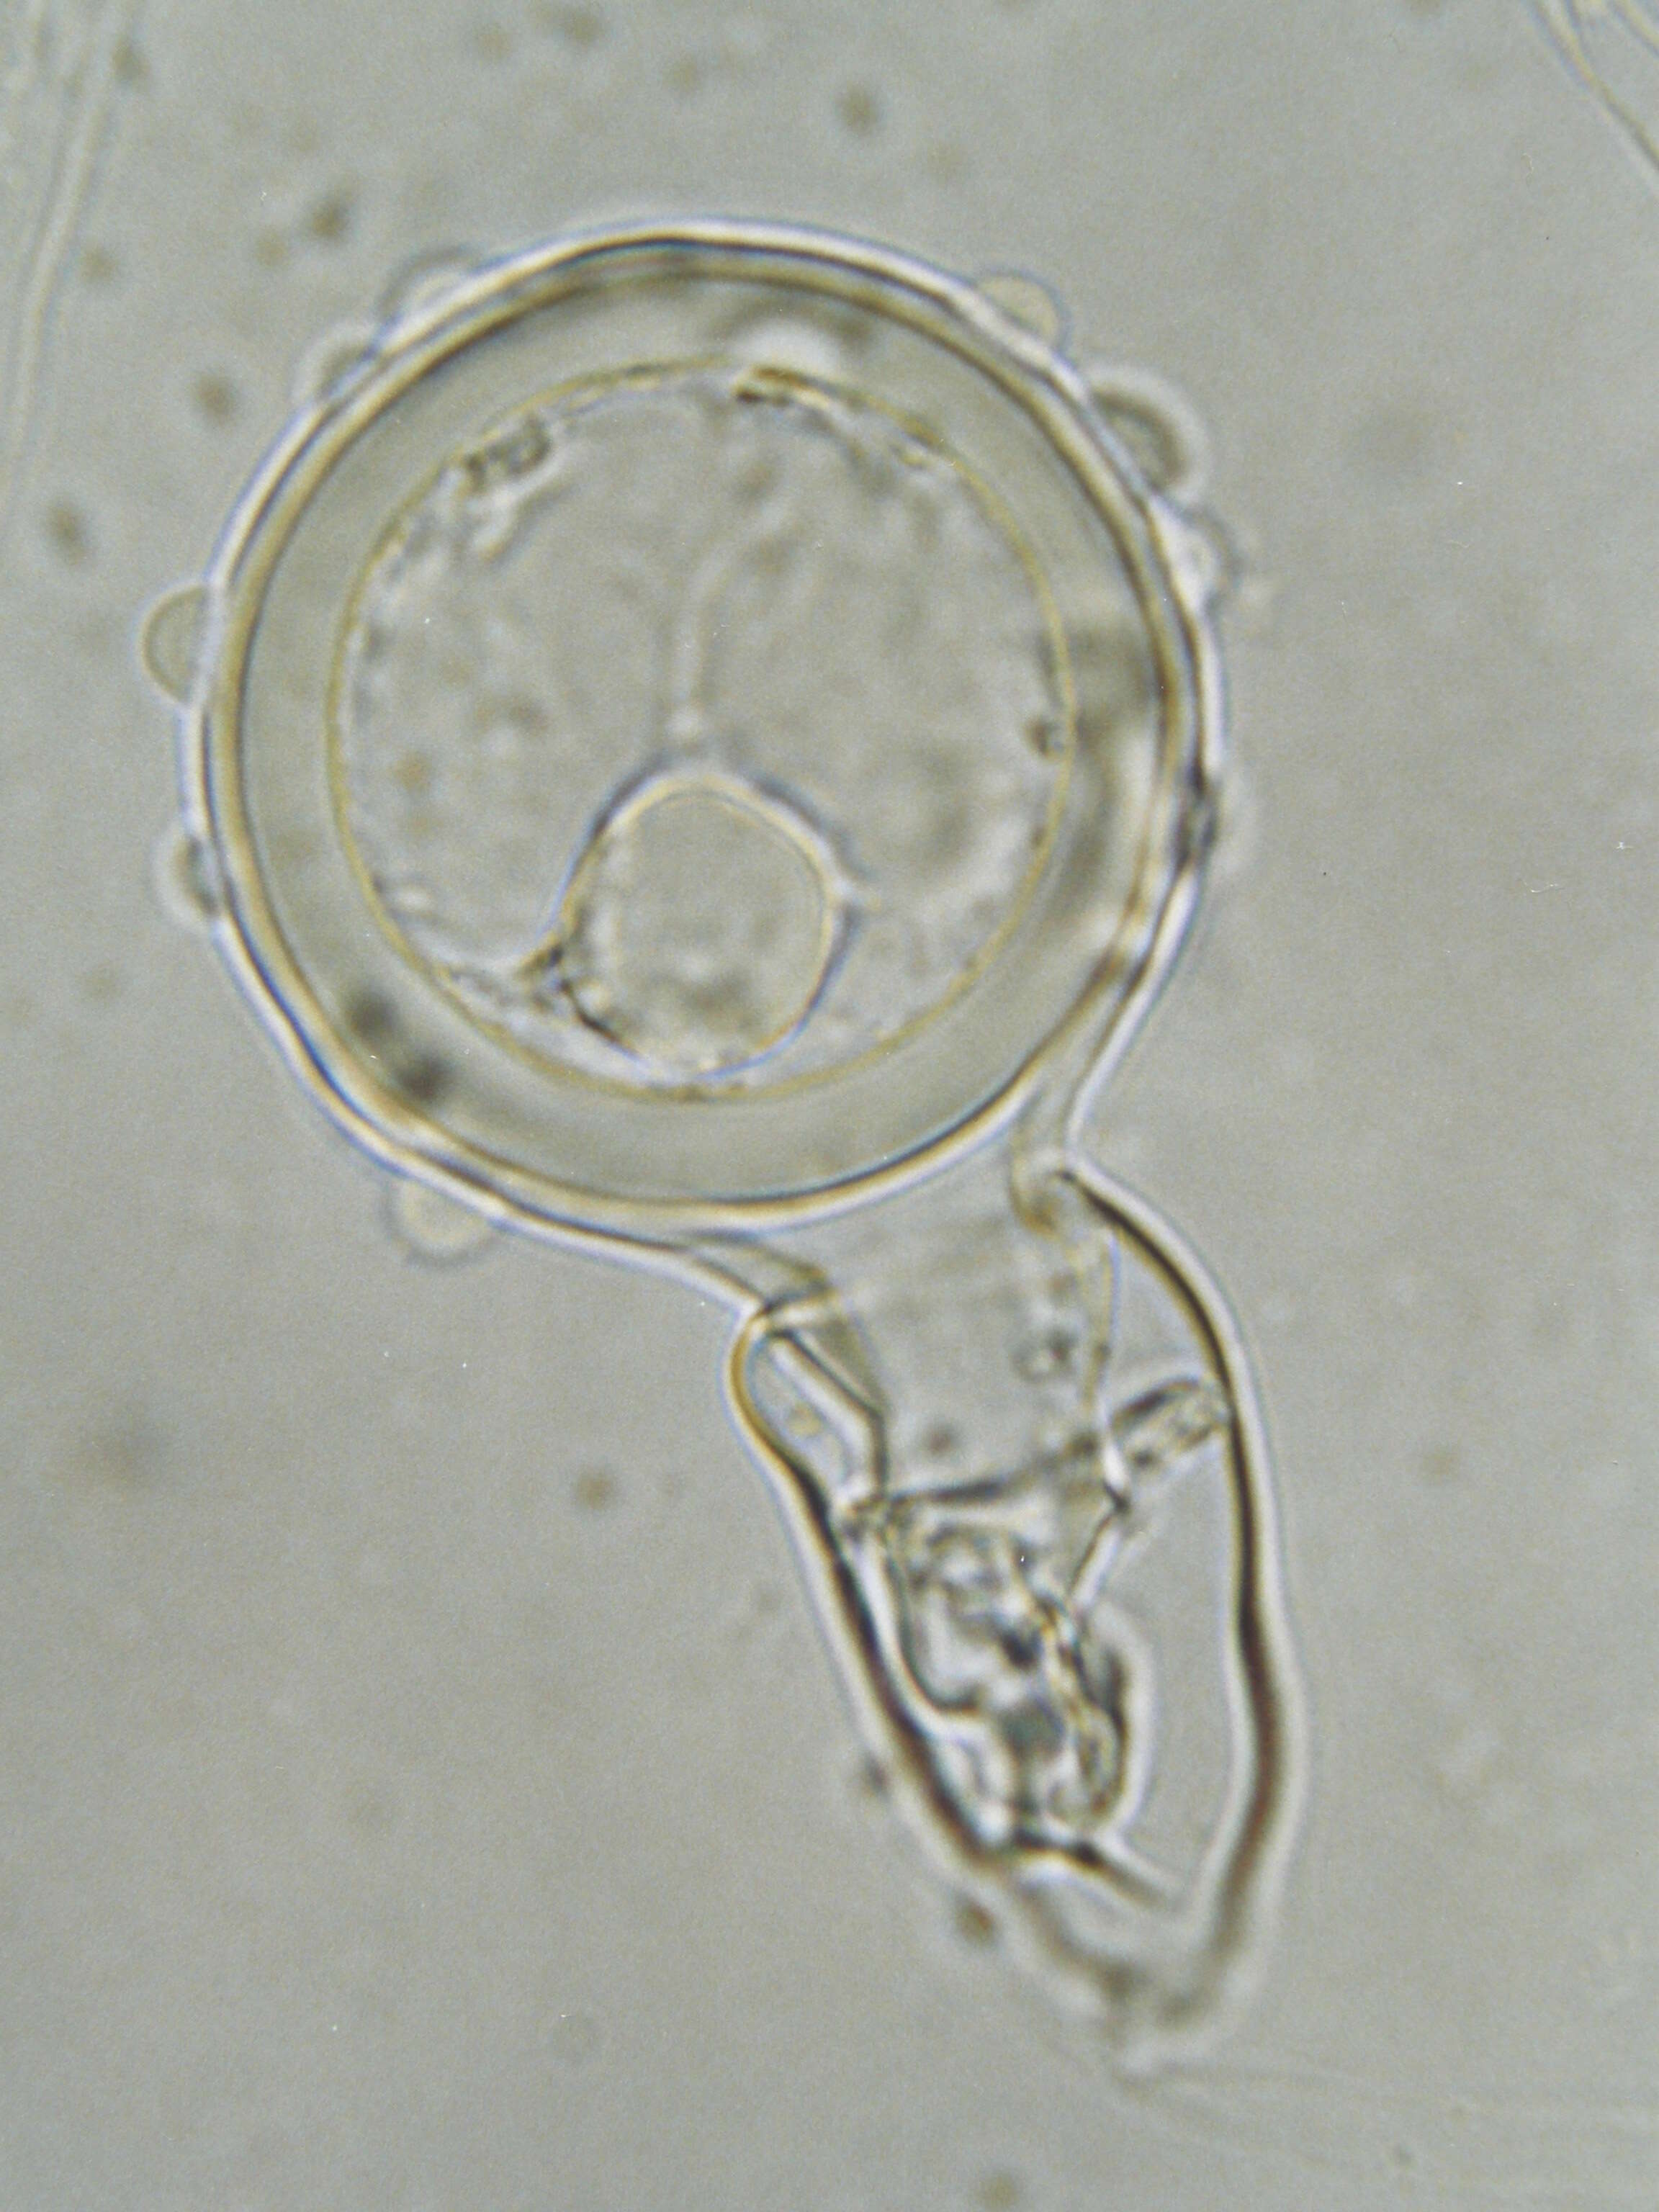 Image of Phytophthora cambivora